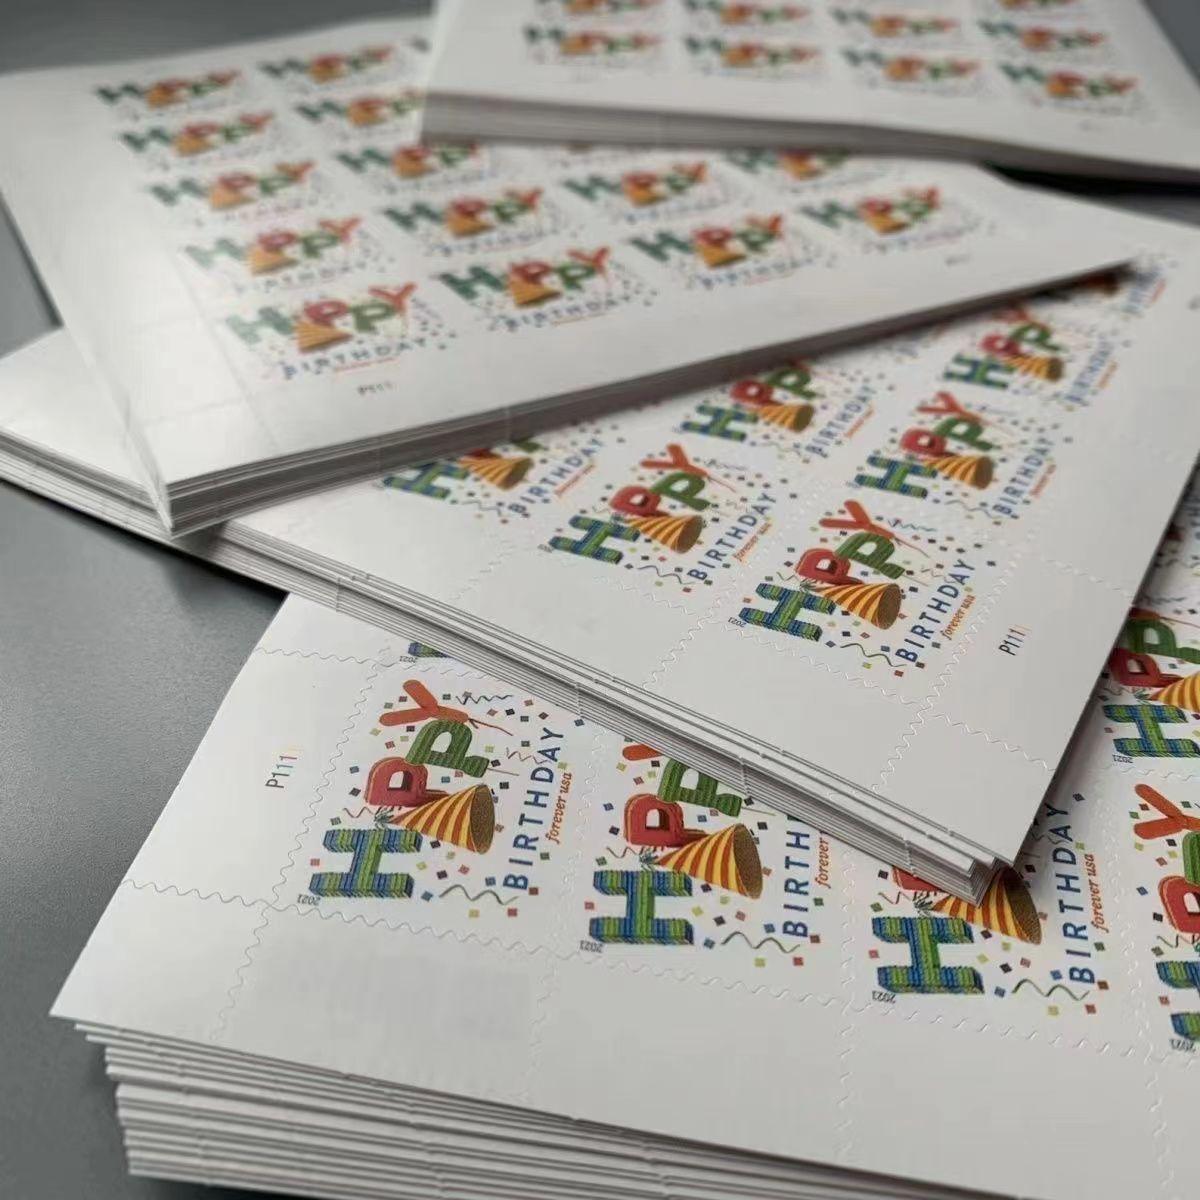 A stack of Happy Birthday 2021 - 5 Sheets / 100 Pcs featuring a colorful "happy holidays" design with festive graphical elements from 2021.